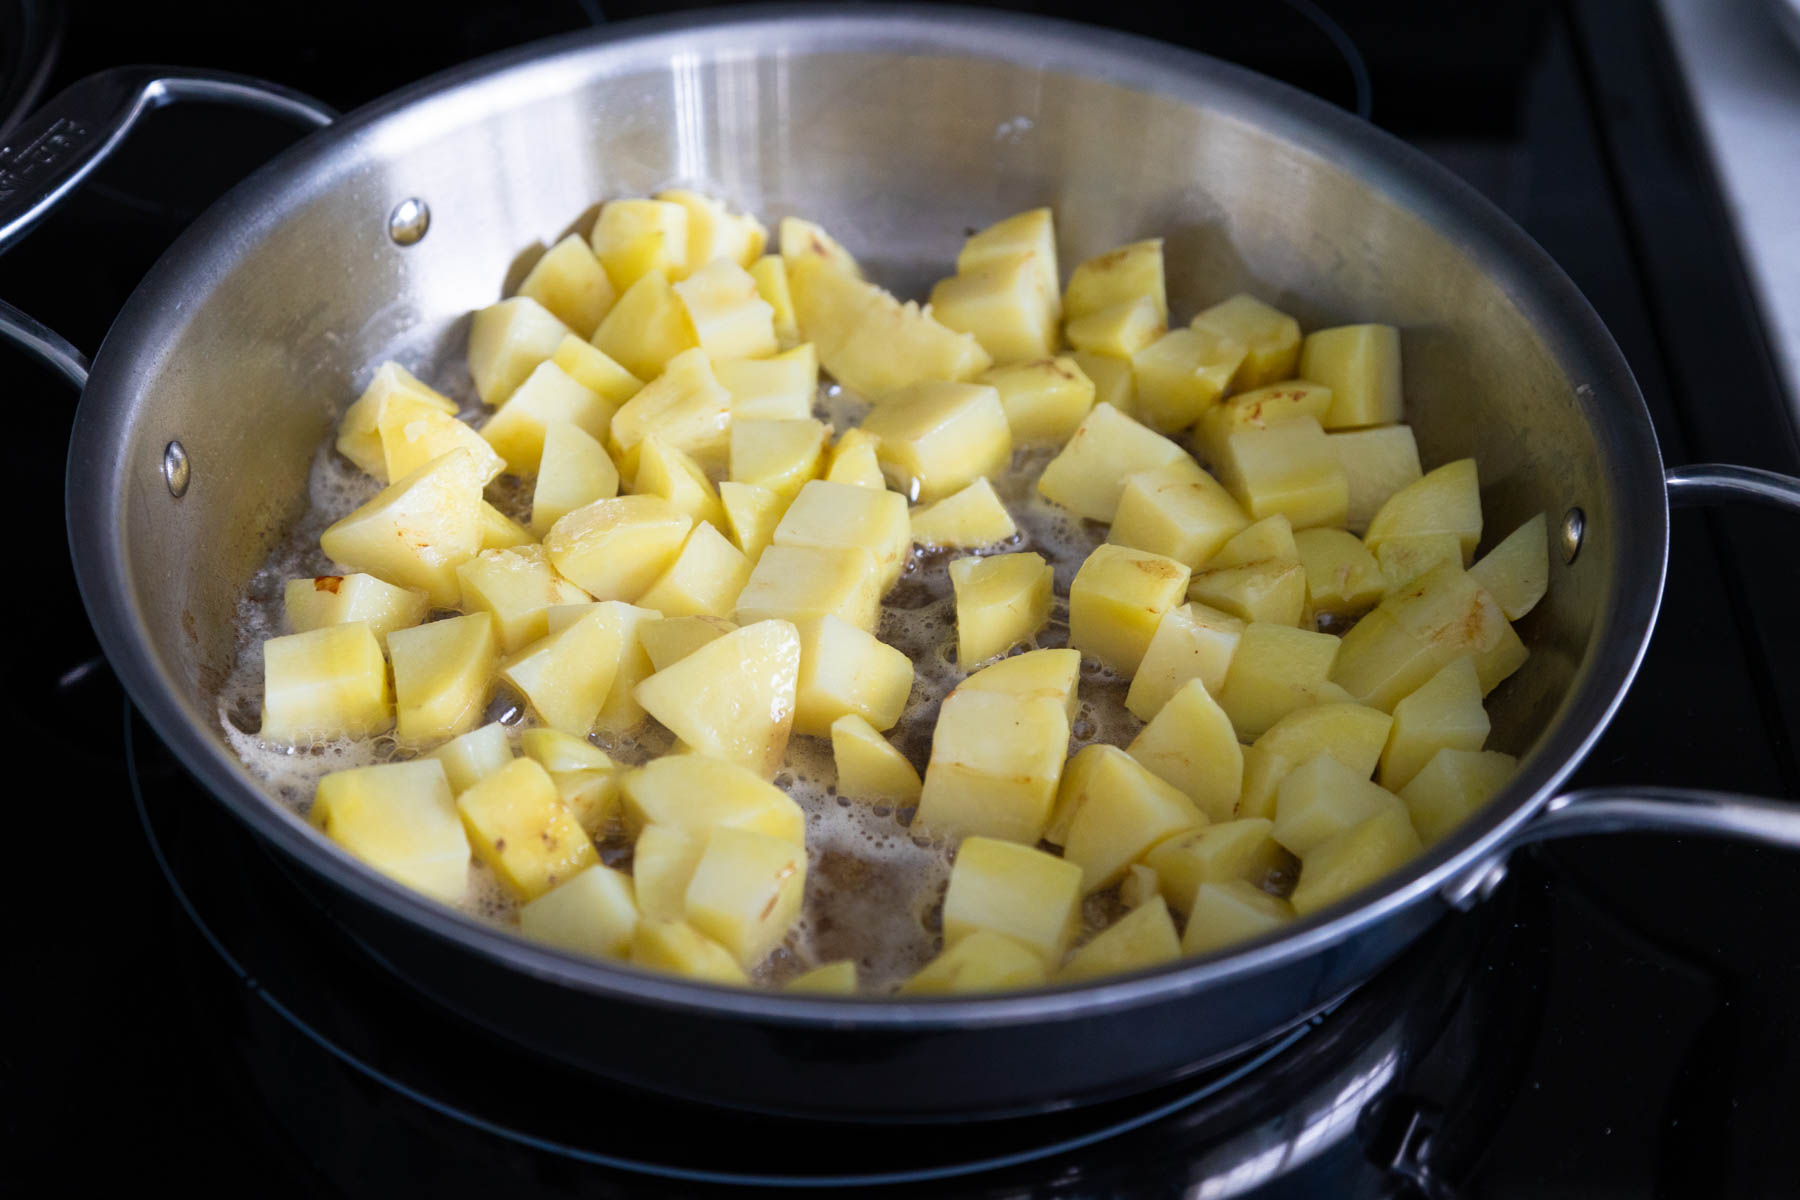 The potato chunks have been spread in an even layer in a large skillet.